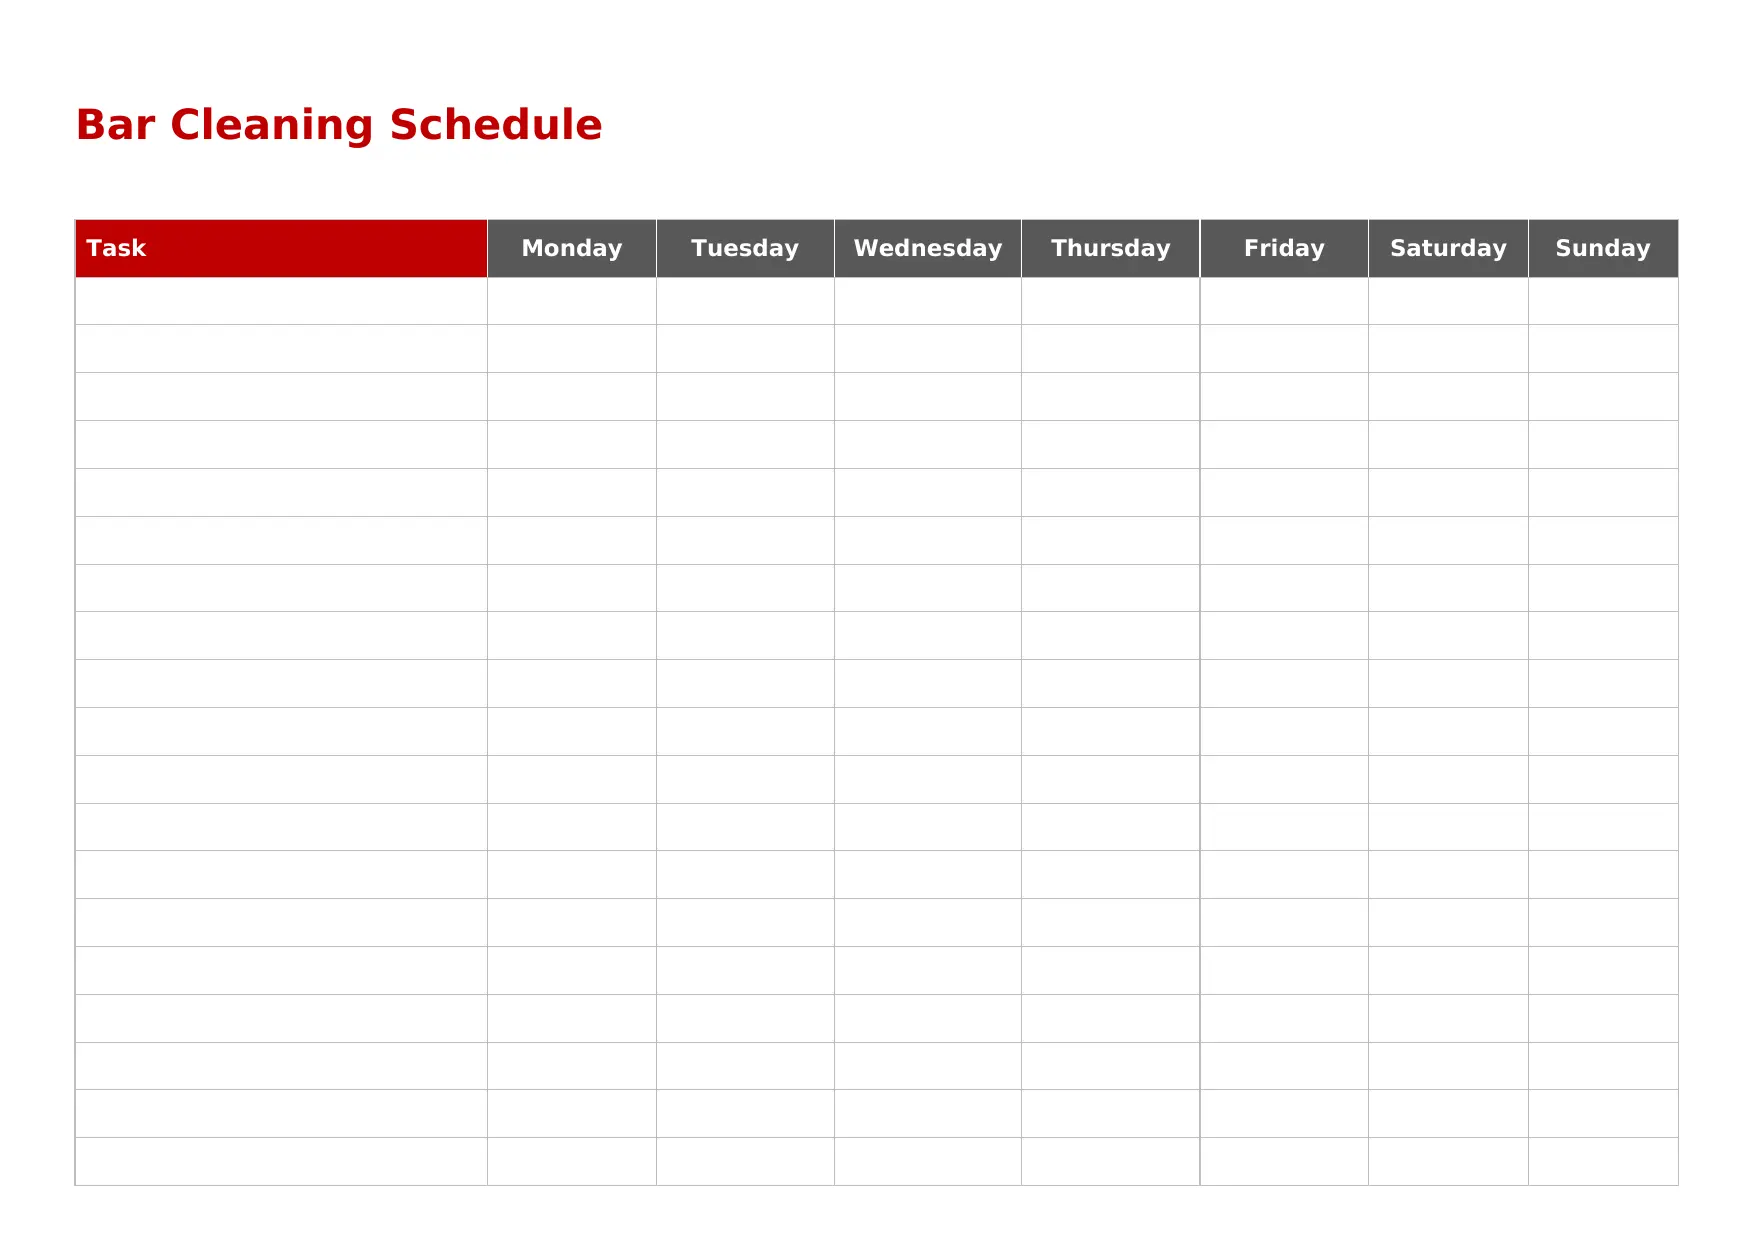 Bar Cleaning Schedule Template: Daily and Weekly